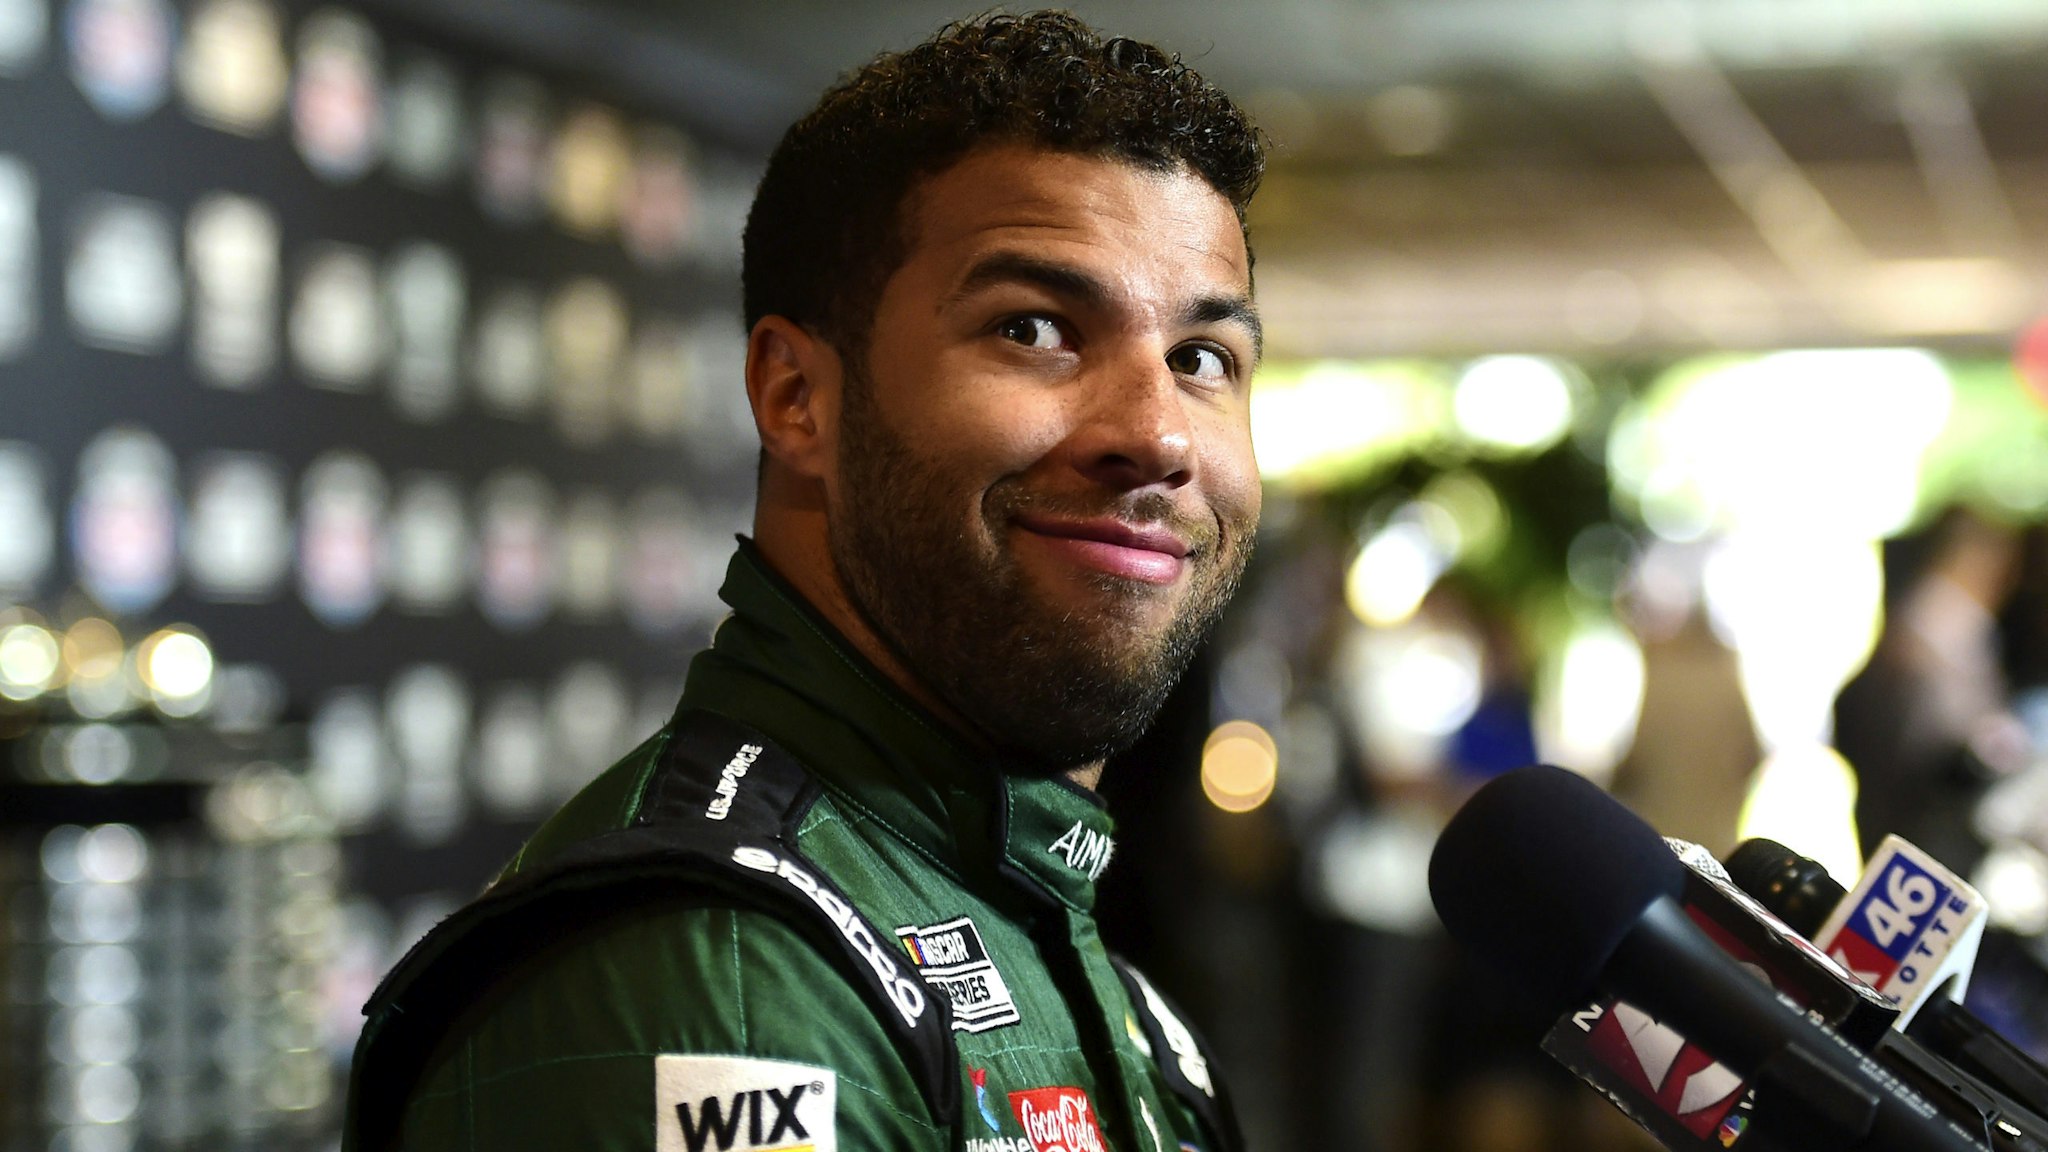 DAYTONA BEACH, FLORIDA - FEBRUARY 12: Bubba Wallace, driver of the #43 United States Air Force Chevrolet, speaks with the media during the NASCAR Cup Series 62nd Annual Daytona 500 Media Day at Daytona International Speedway on February 12, 2020 in Daytona Beach, Florida.